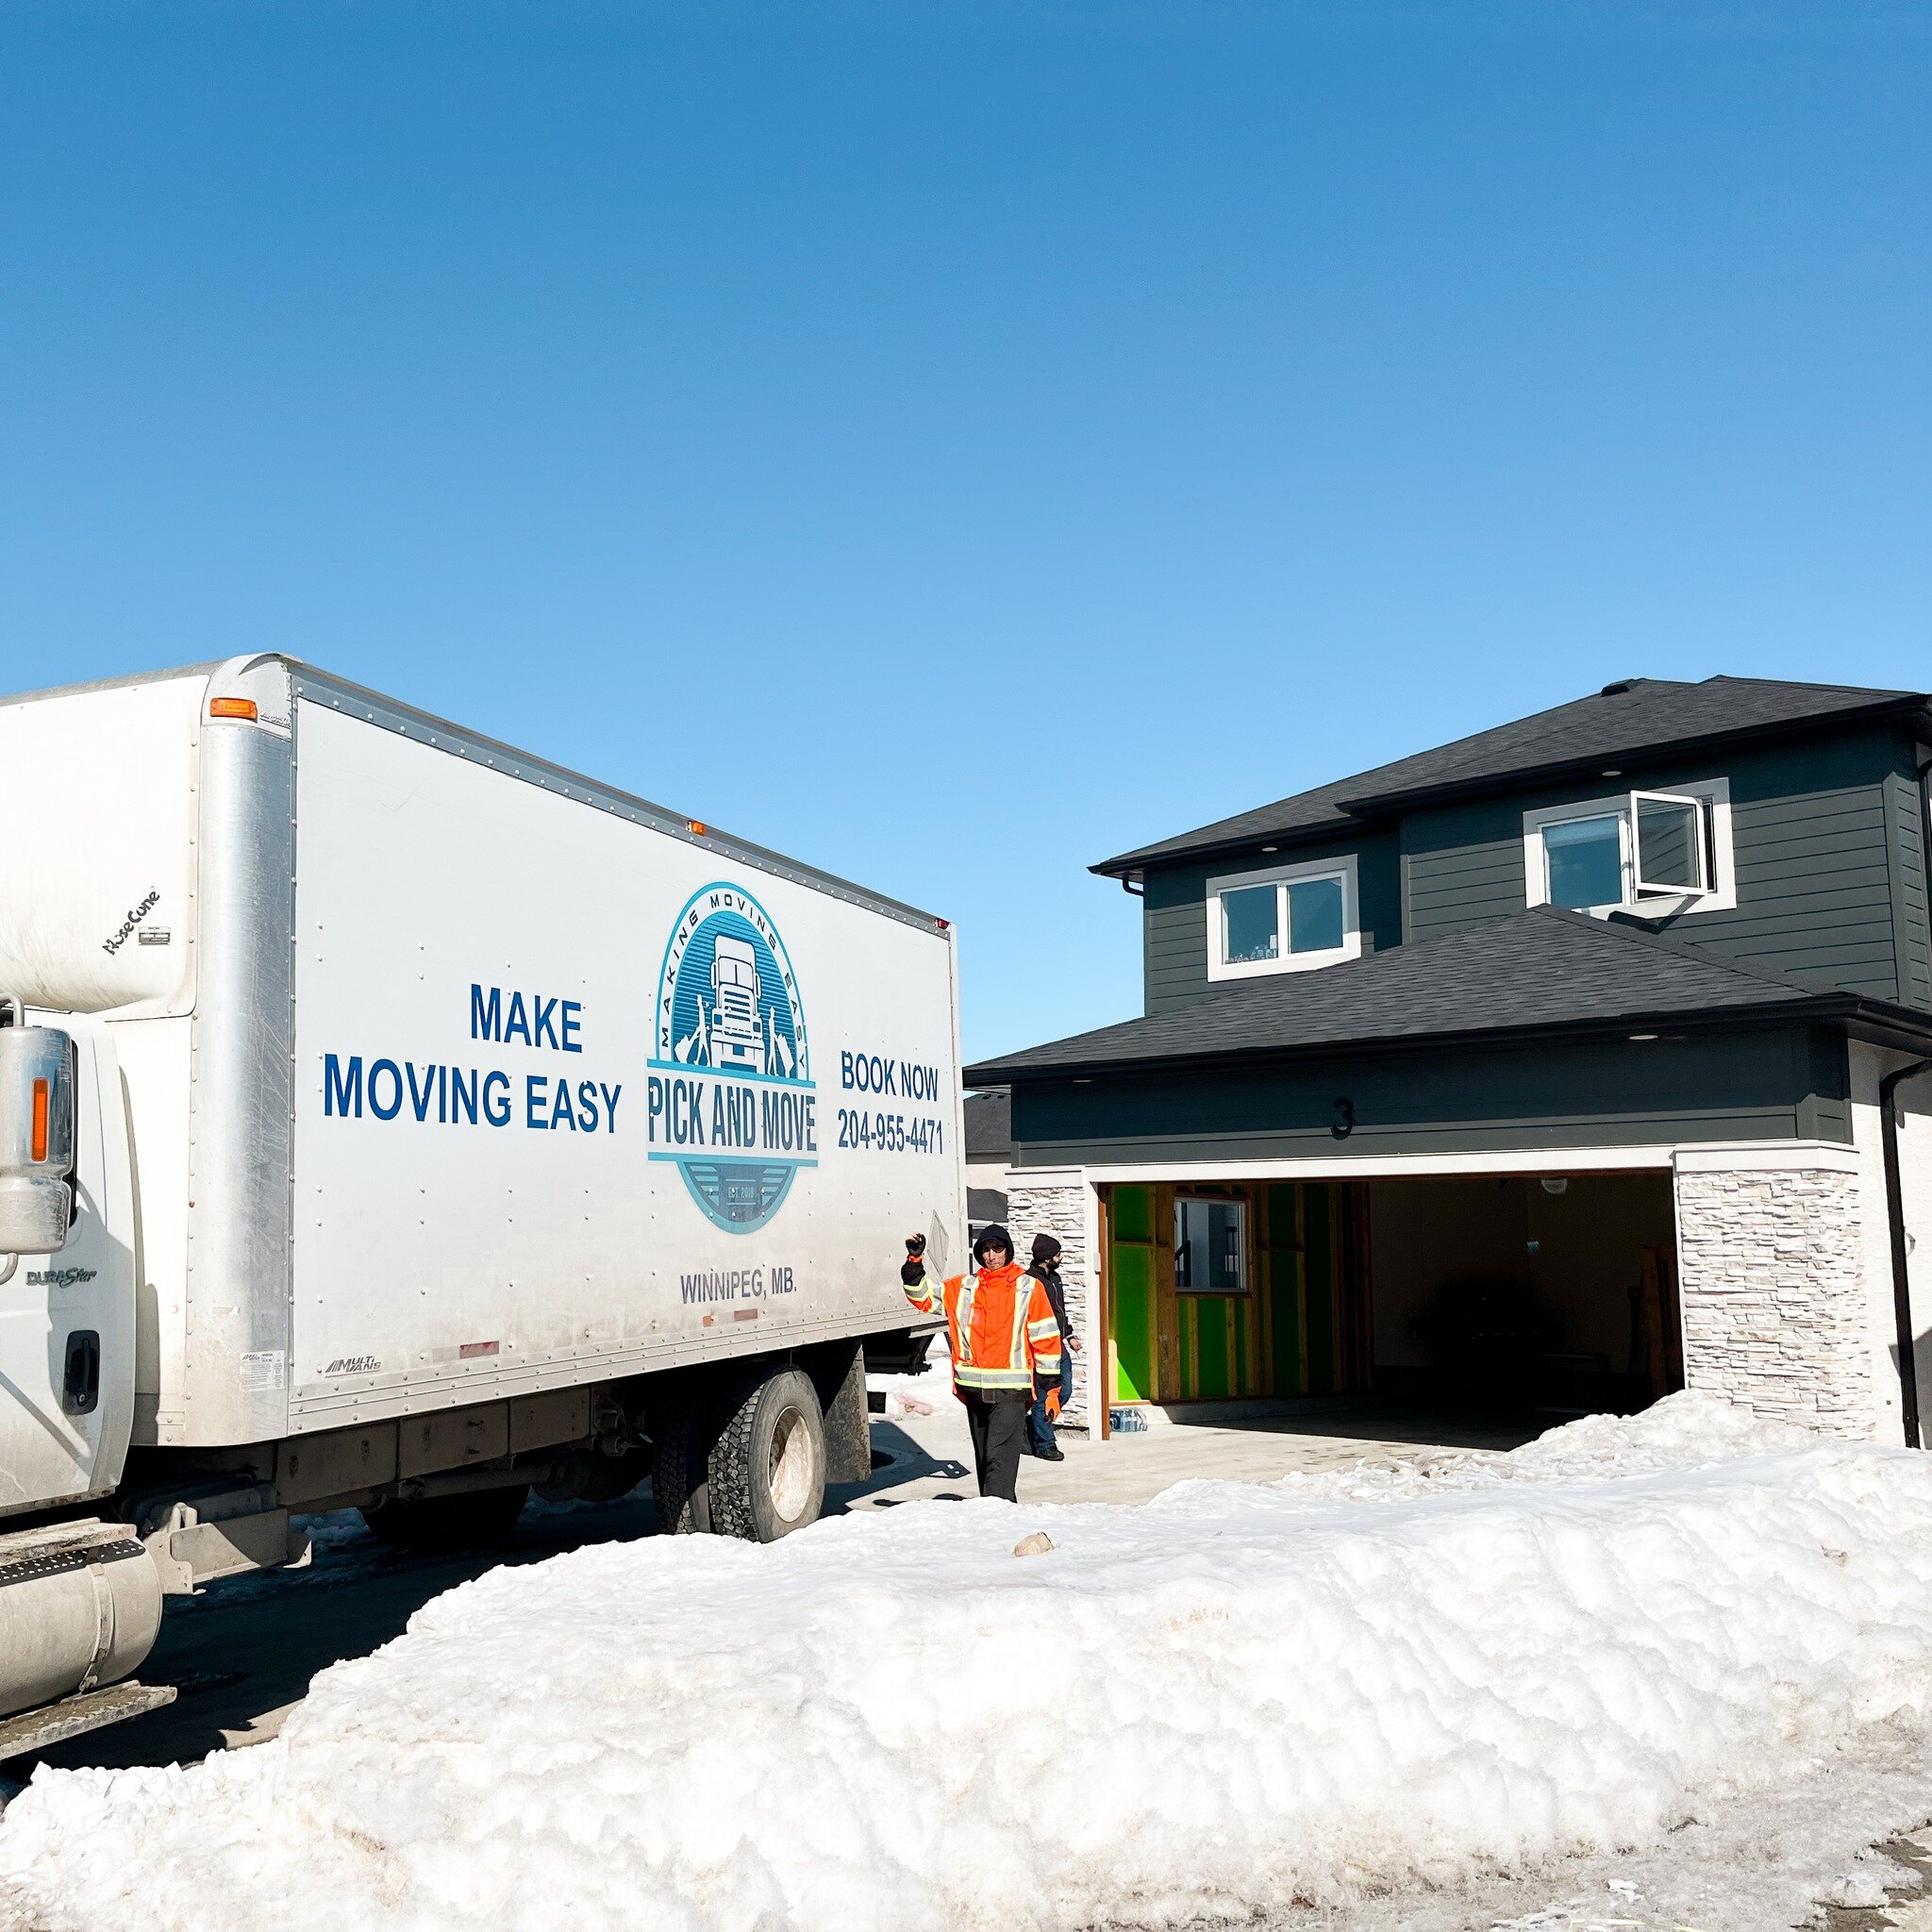 Moving to a new home is an exciting new chapter in life, and we're here to help families start this new journey on the right foot.🏡

We're committed to providing top-notch service and support to ensure your move is a positive experience.

Let us hel